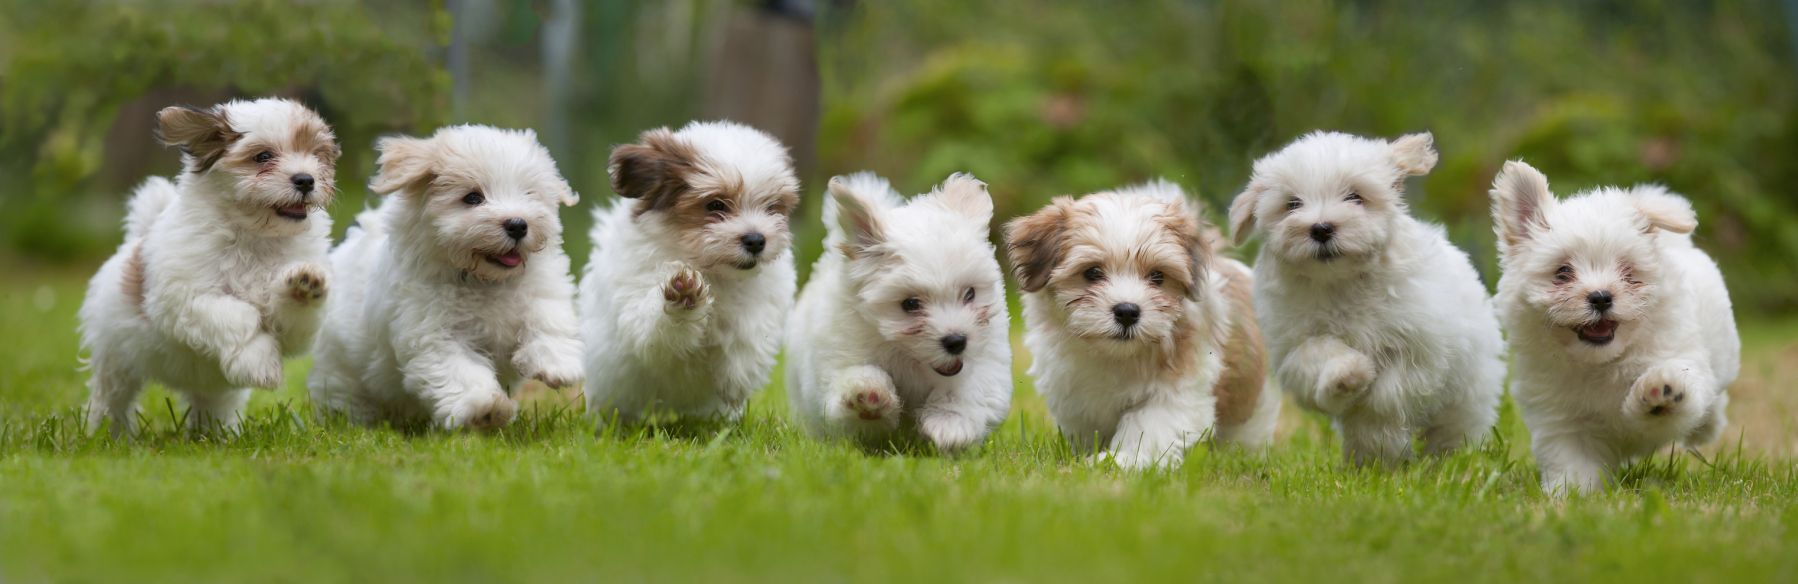 small baby puppies